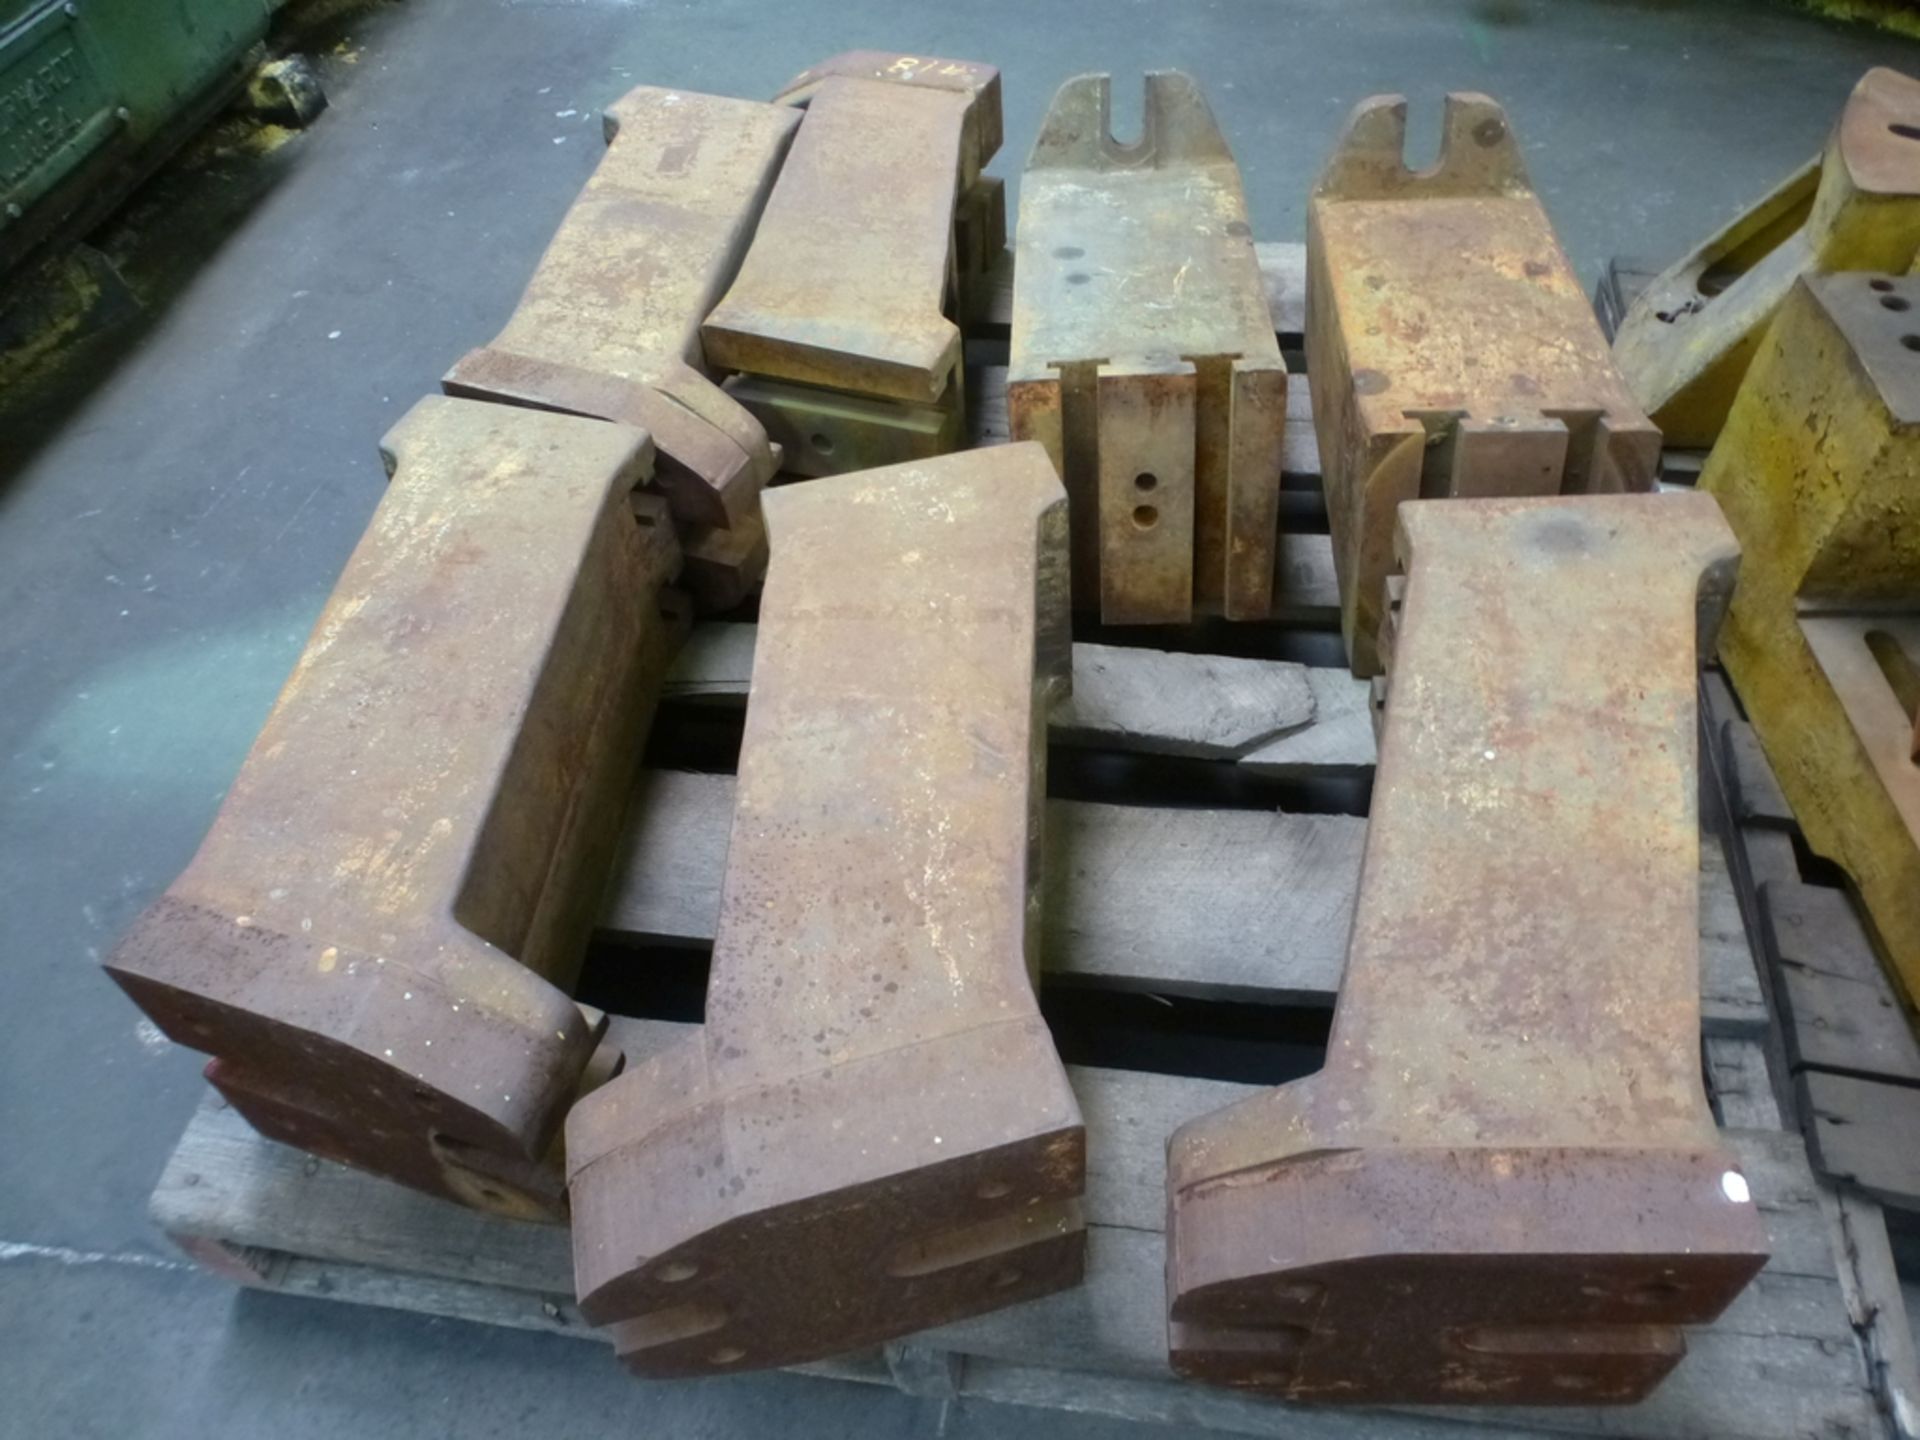 Lot of Risers - North Spartanburg, SC - Approx. 7 - 20" Height